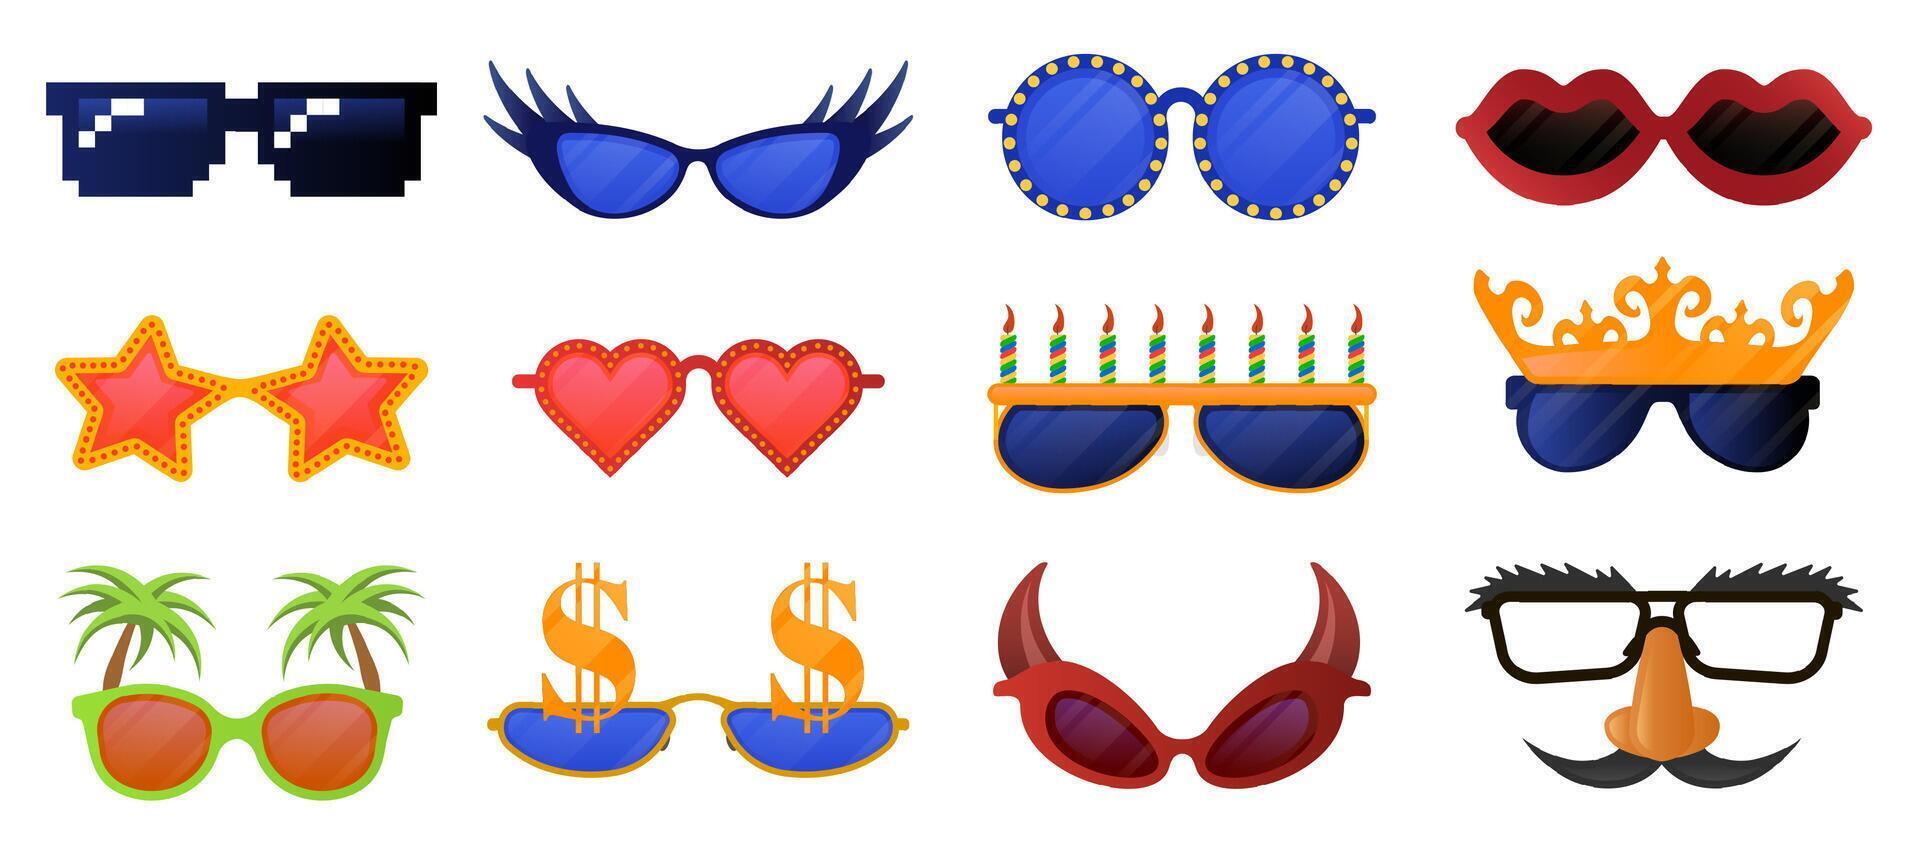 Funny party glasses. Carnival, masquerade sunglasses, photo booth party decorative glasses vector illustration icons set